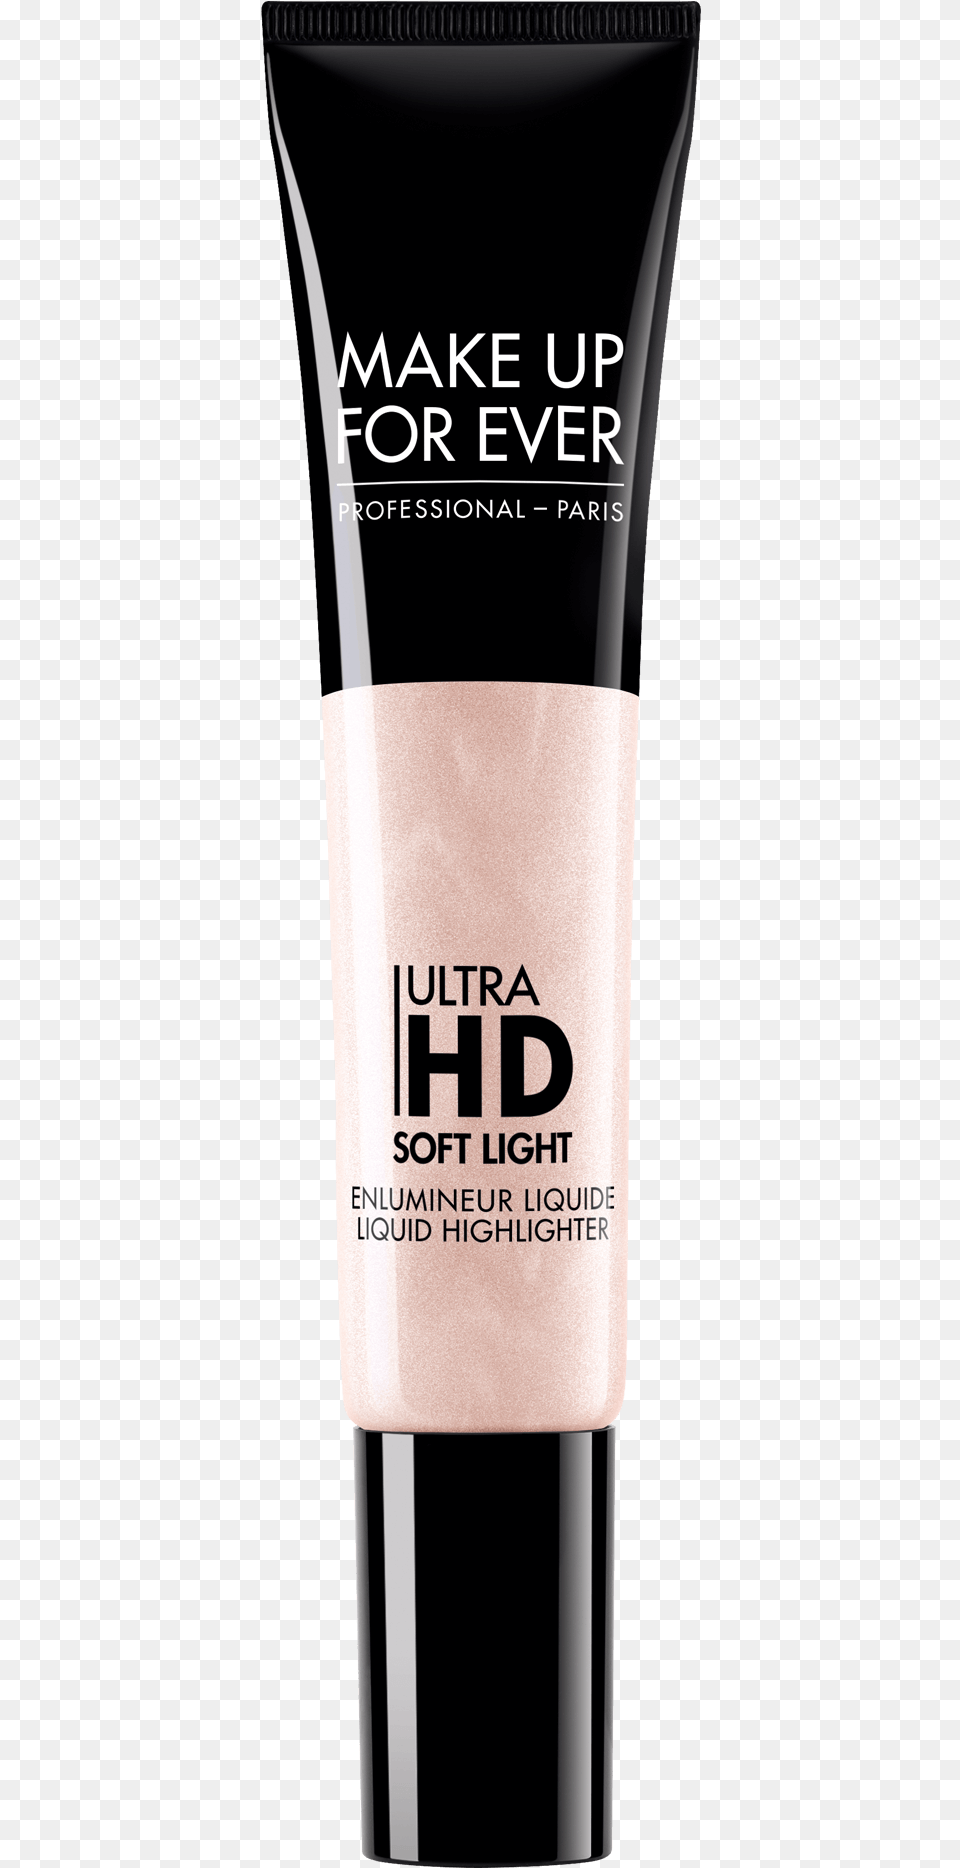 Make Up For Ever Ultra Hd Soft Light, Bottle, Cosmetics Free Png Download